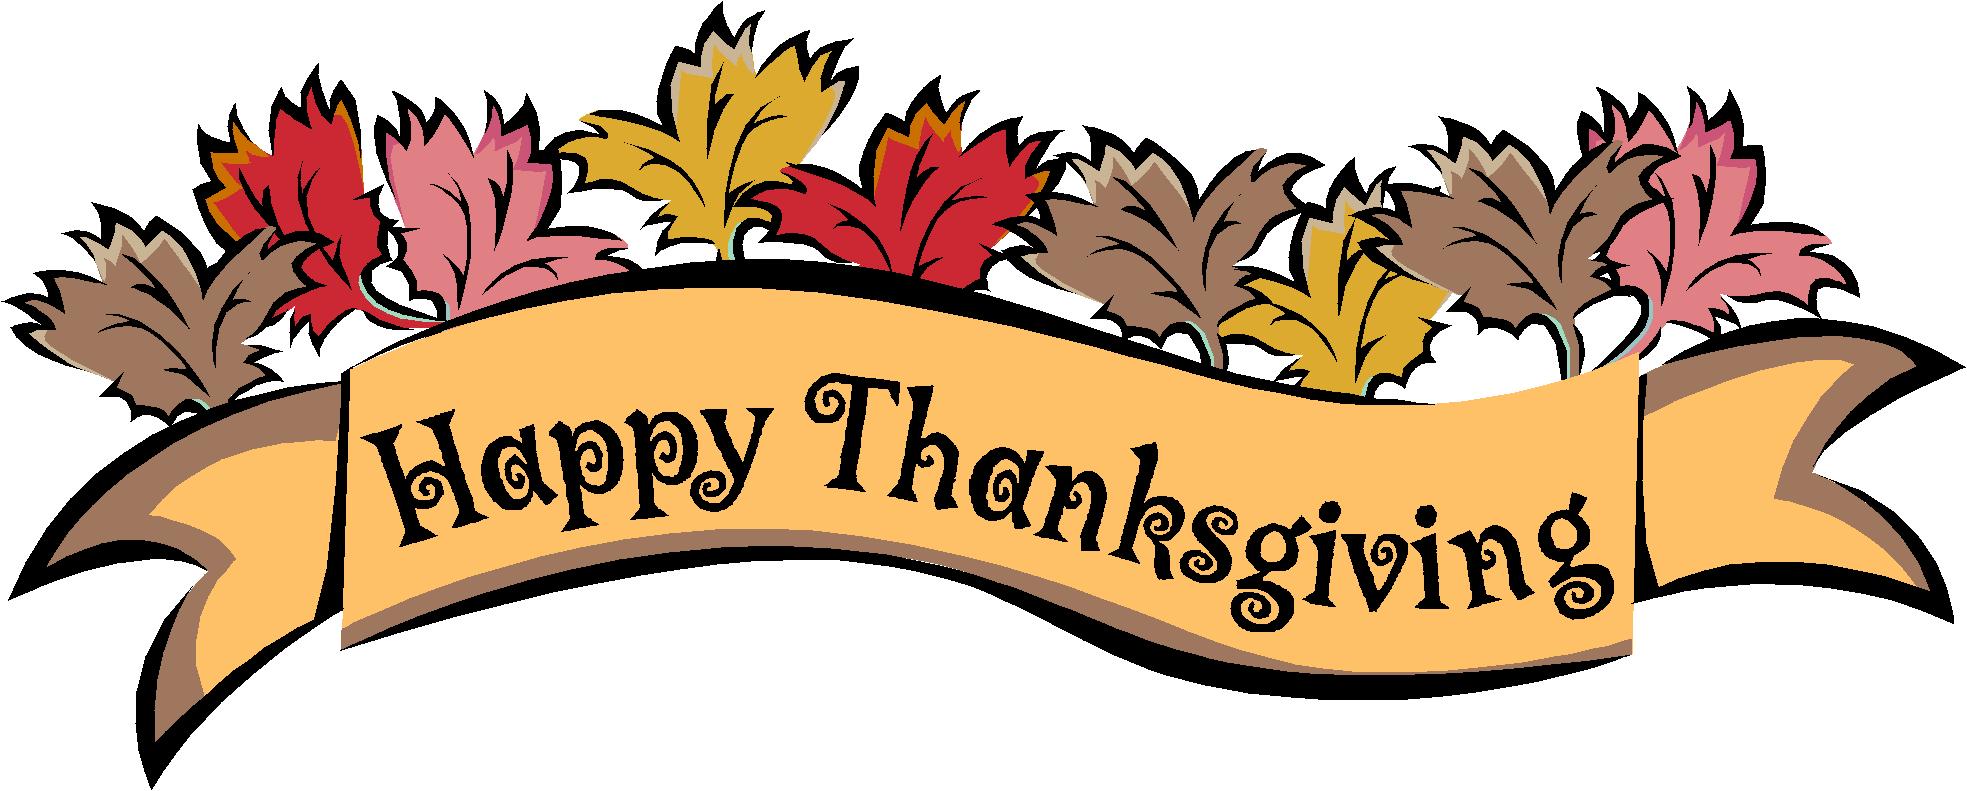 Free Giving Thanks Pictures, Download Free Giving Thanks Pictures png